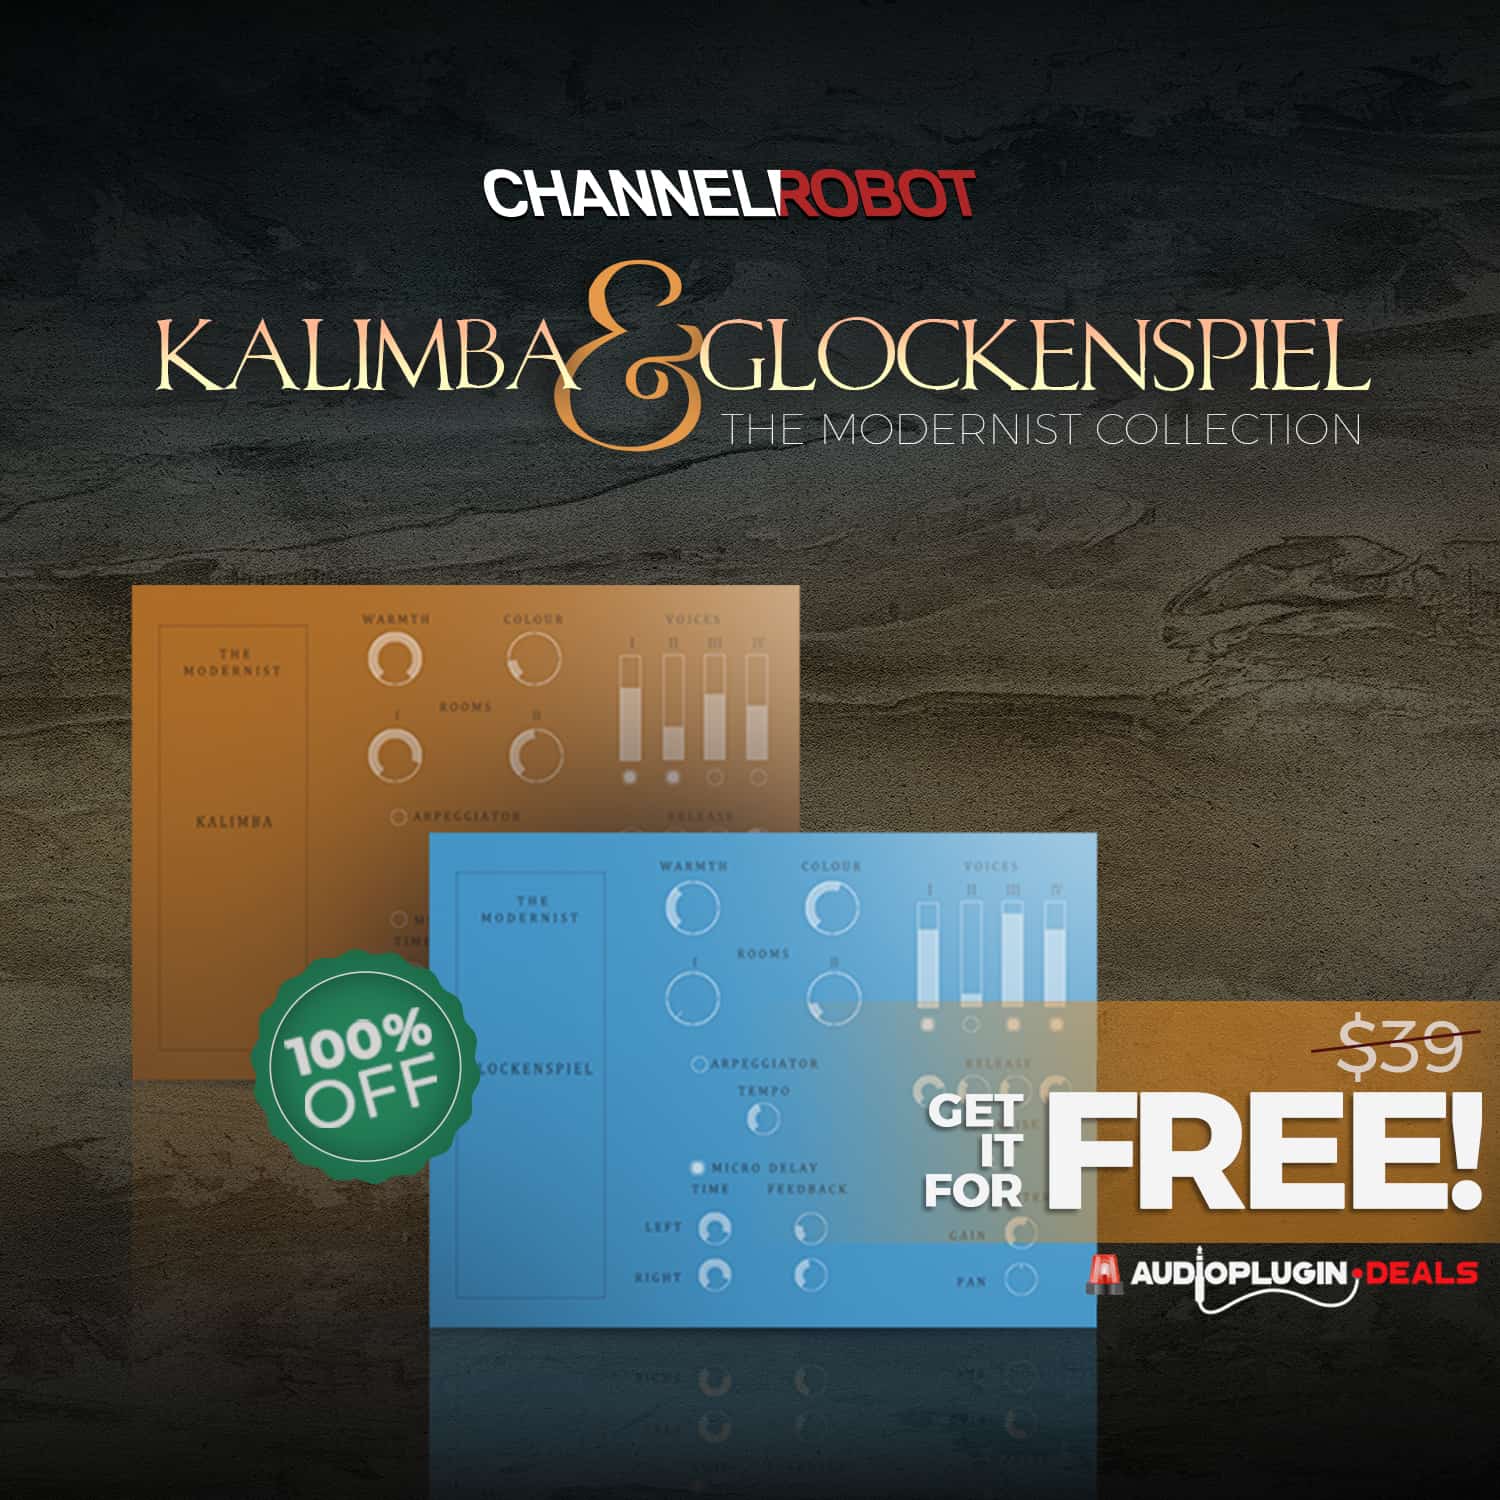 Free for two Week: The Modernist Collection:  Kalimba & Glockenspiel by Channel Robot